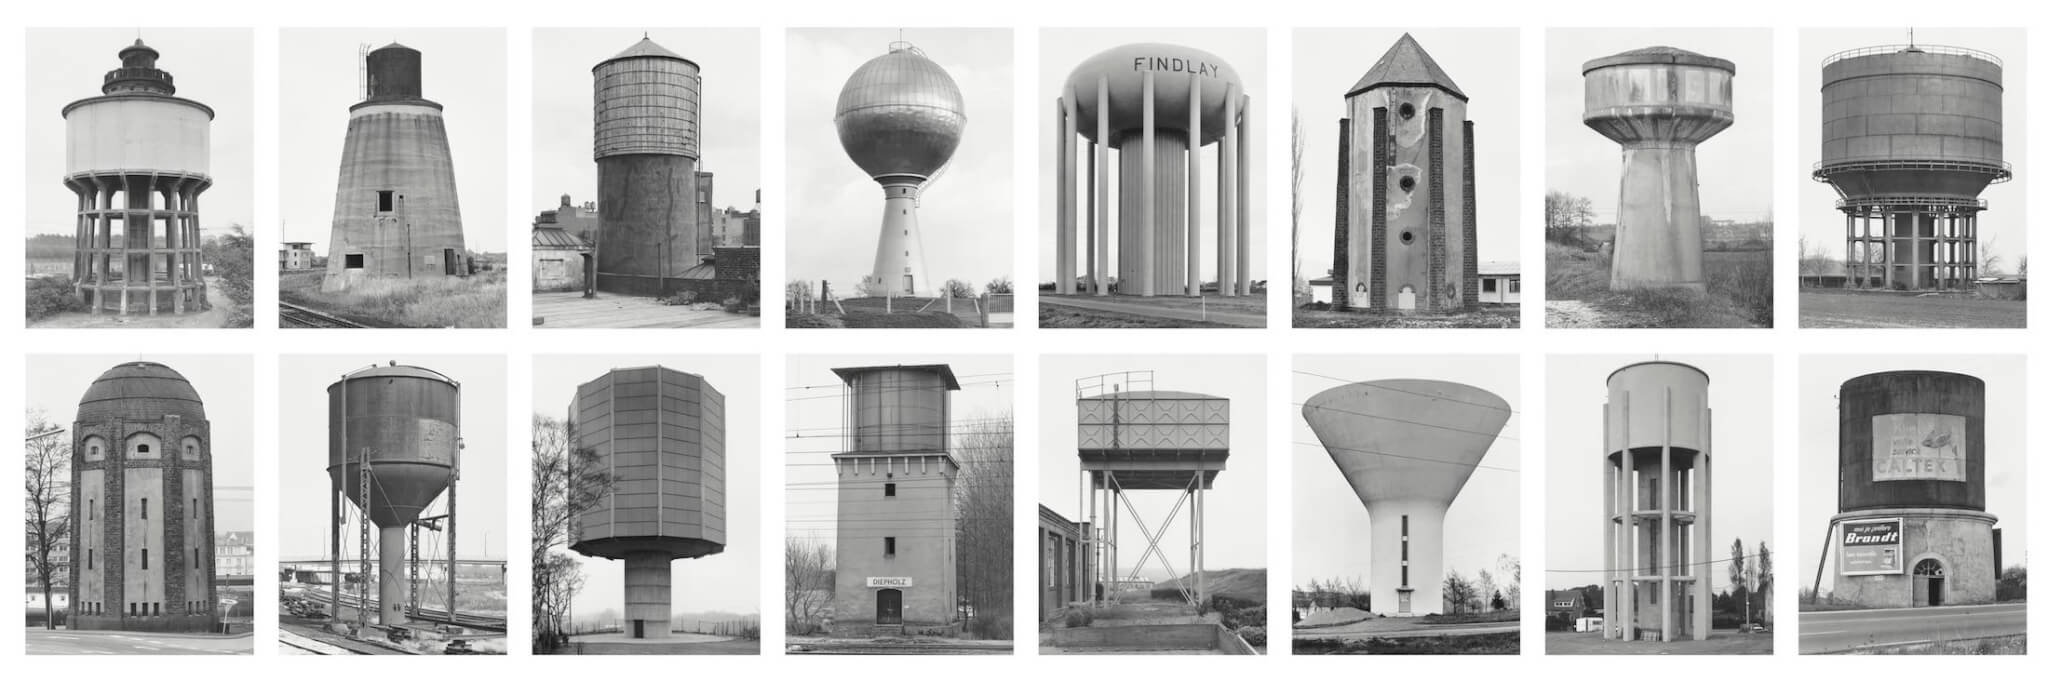 B&W photo of different water towers